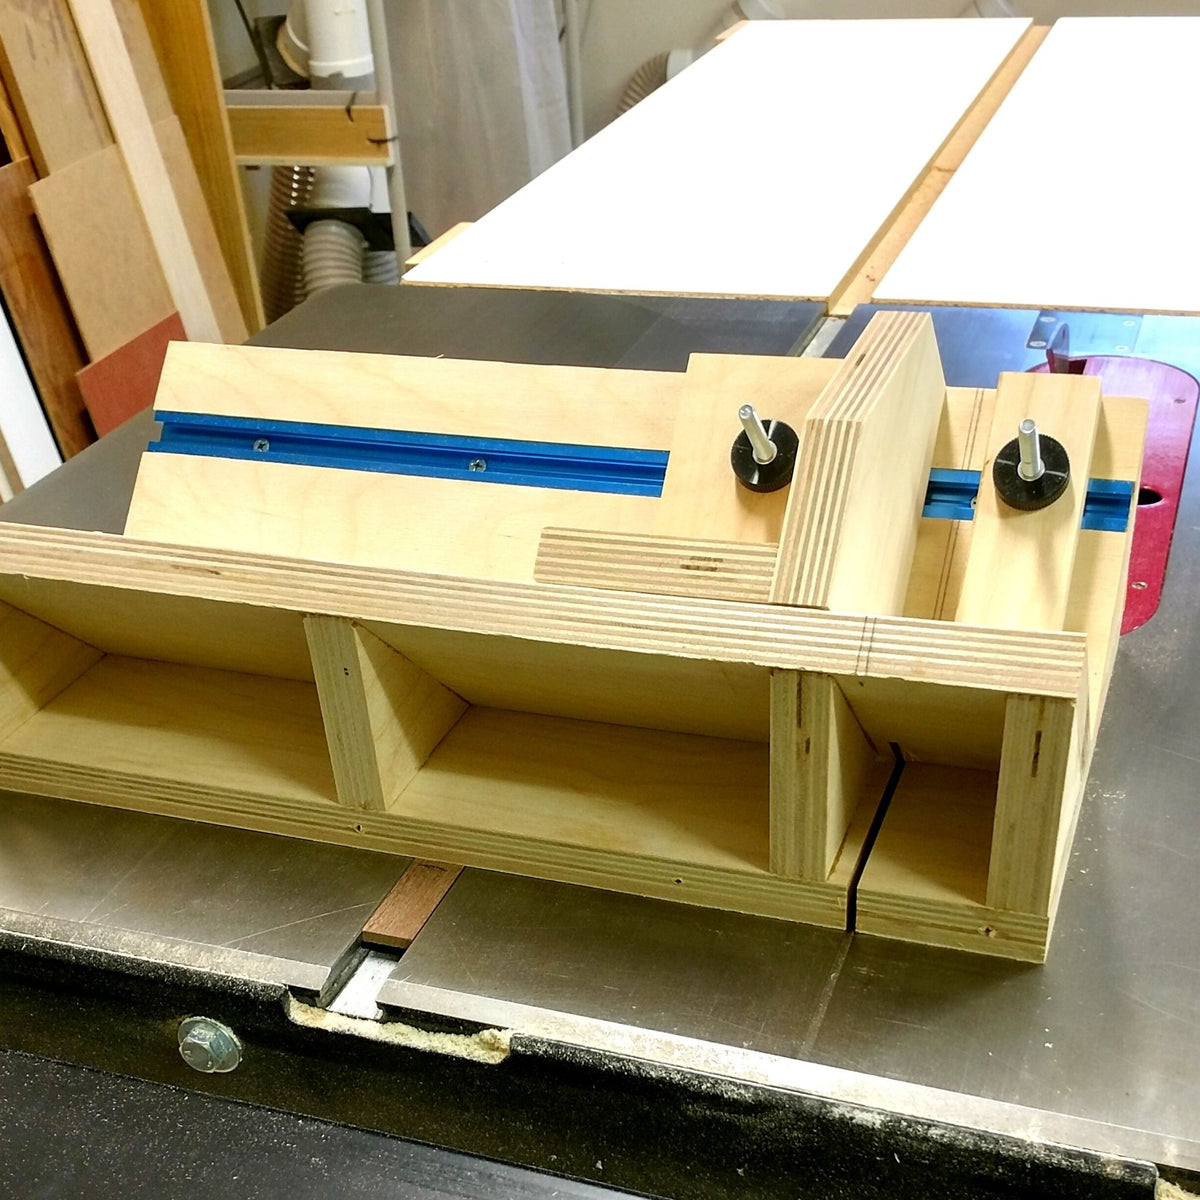 How to Make a Spline Jig for Picture Frames